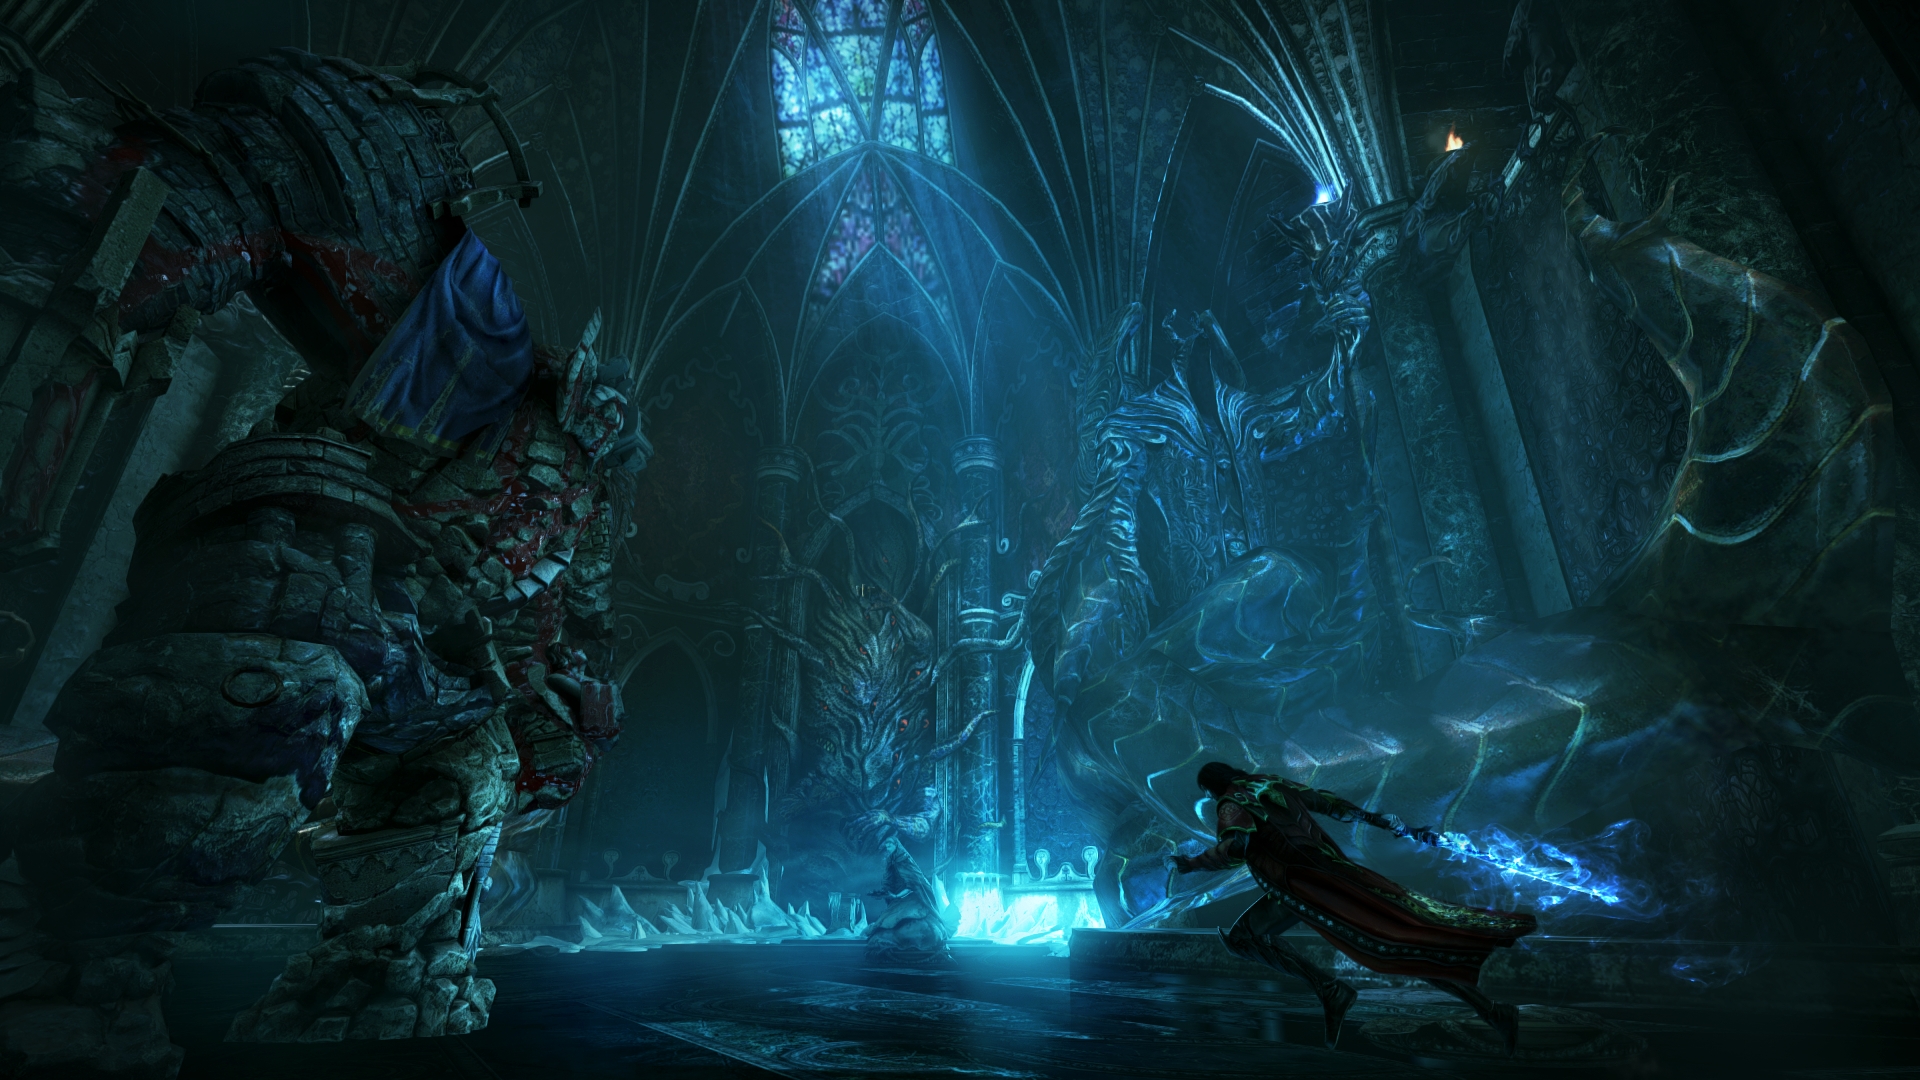 Castlevania: Lords of Shadow screenshots, images and pictures - Giant Bomb